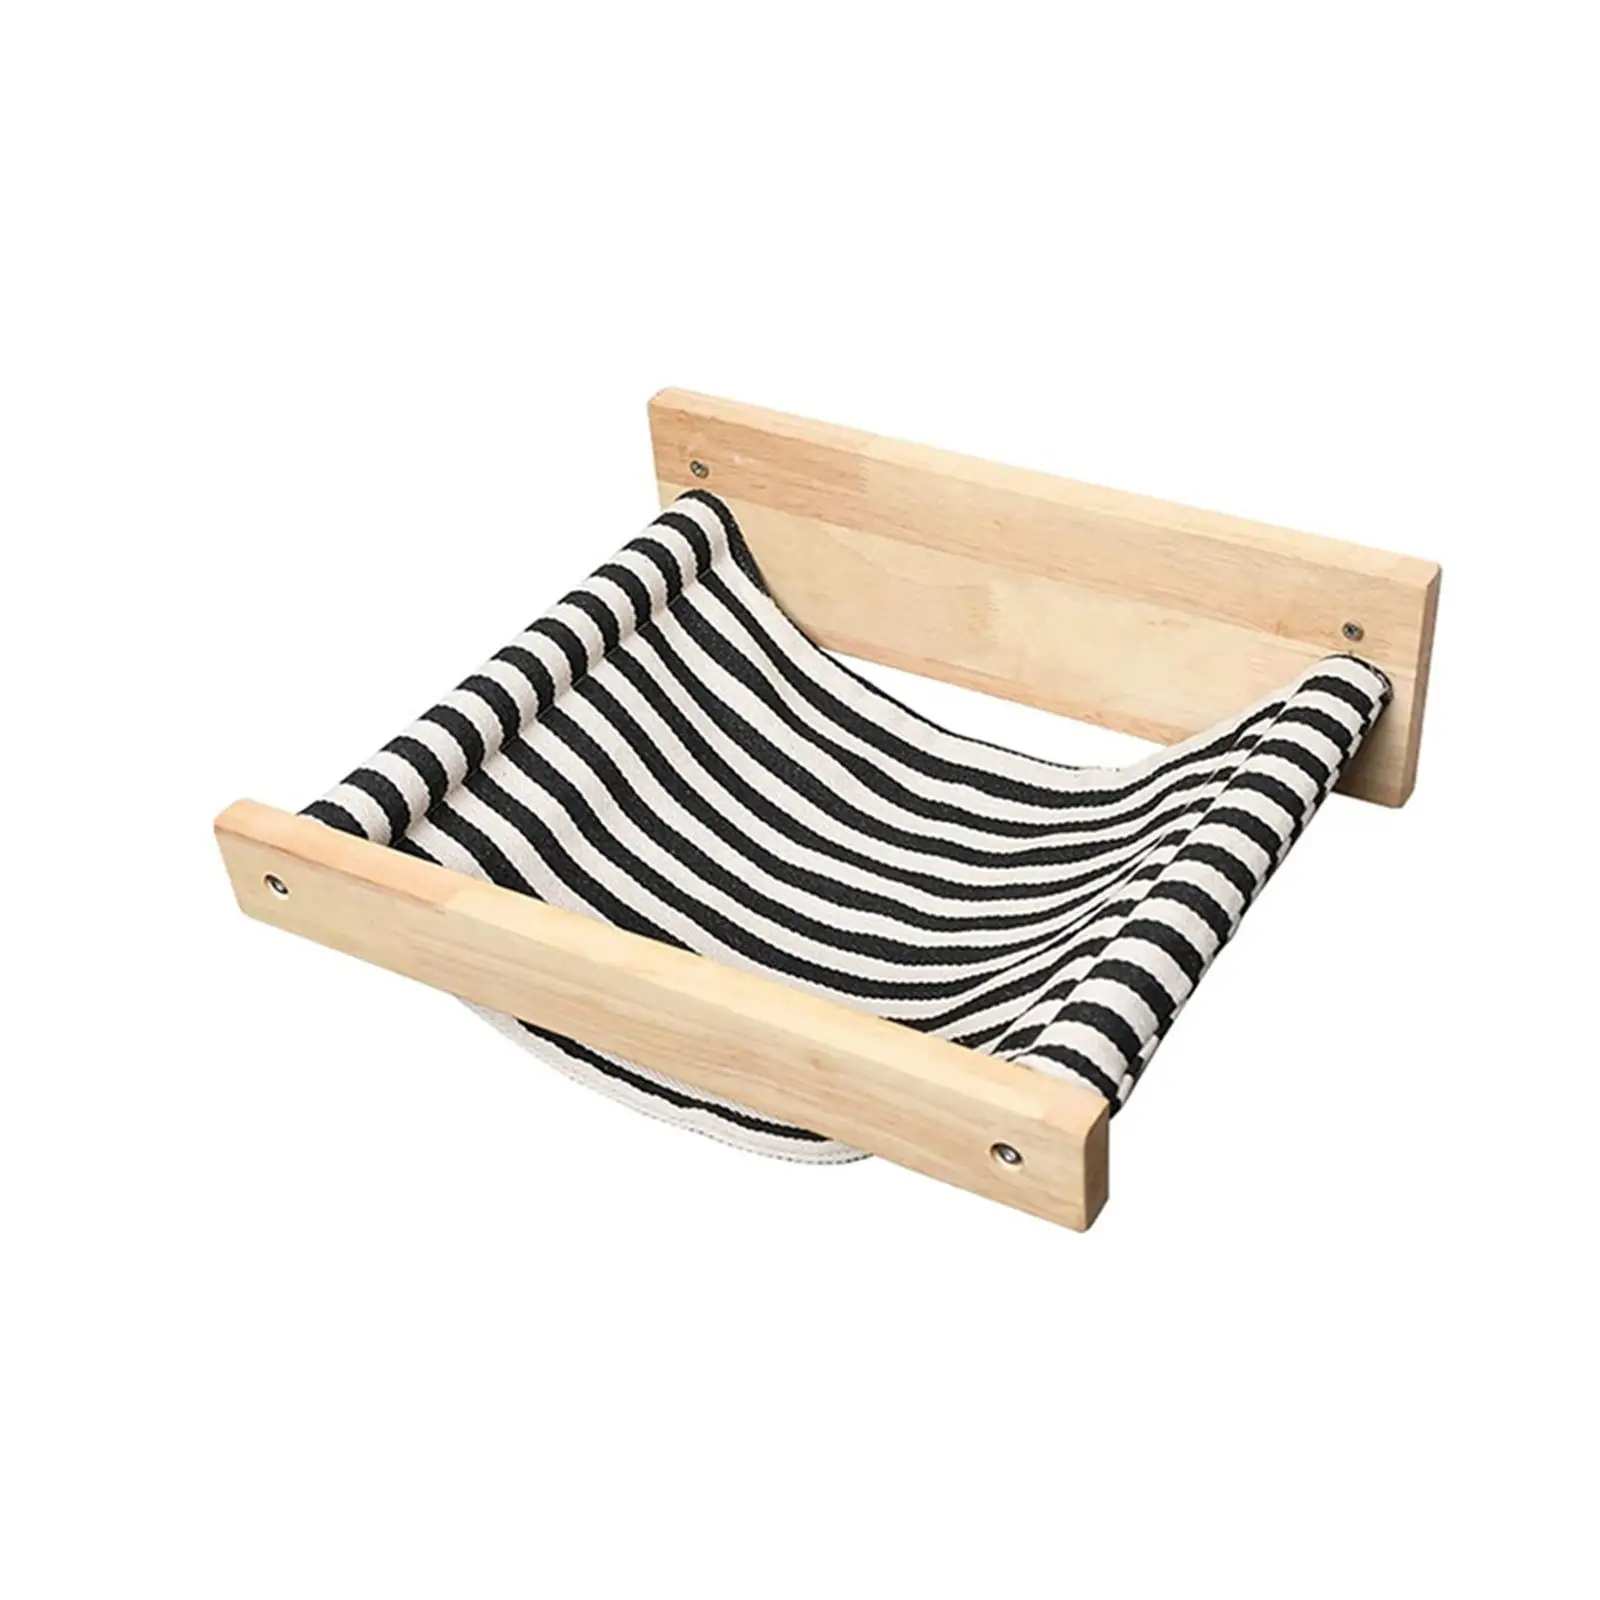 Cat Hammock Wall Mounted Soft Comfortable Lounging Modern Sleeping Cat Perches Black Stripe Cat Shelves Kitty Beds Perches